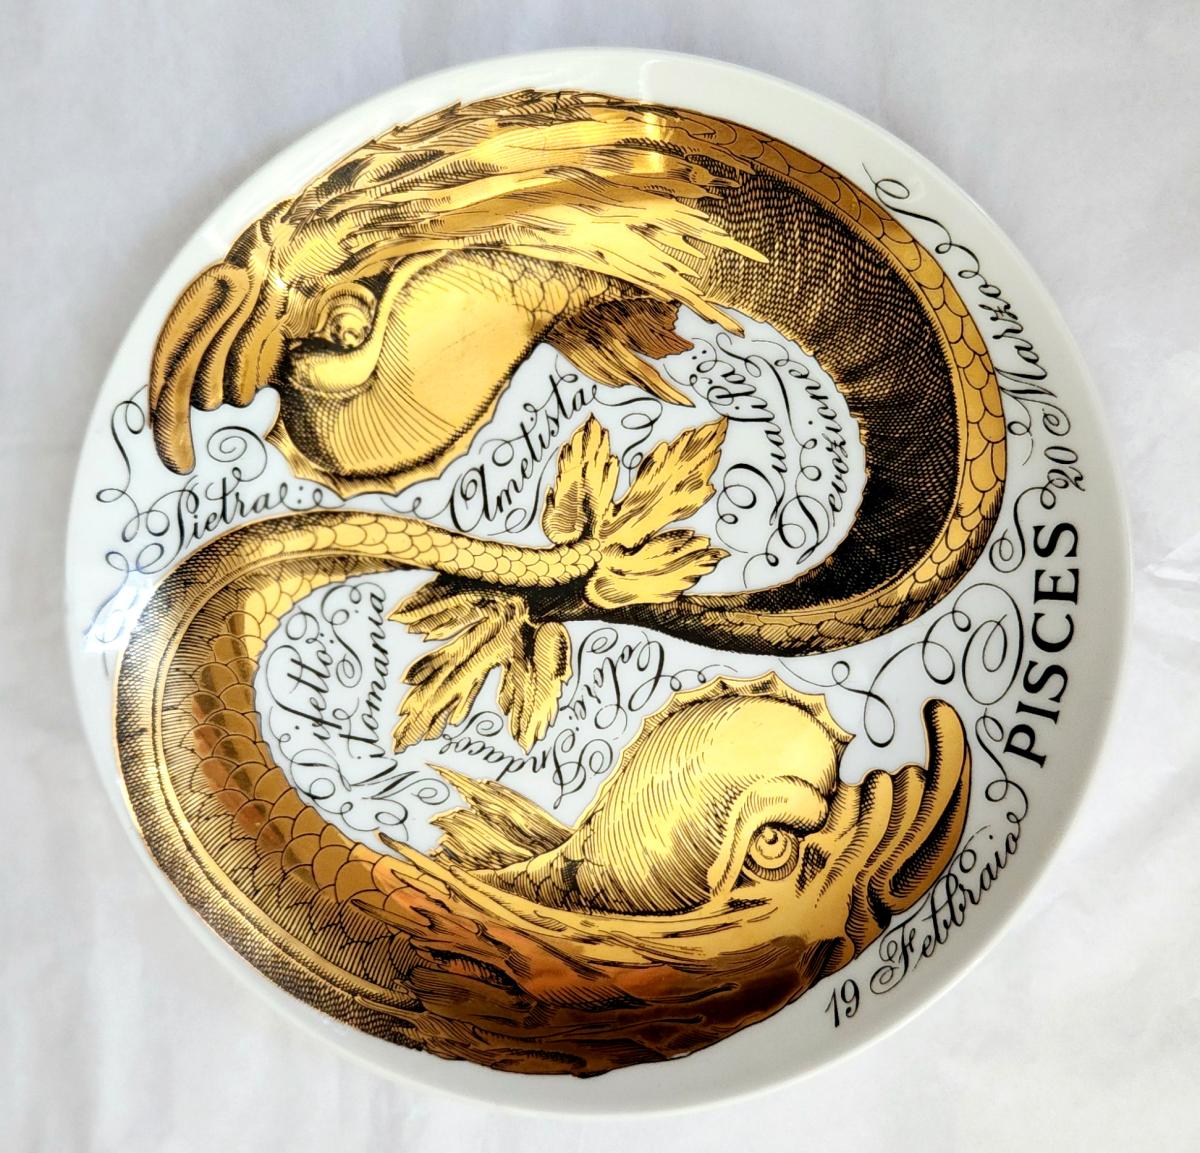 Vintage Piero Fornasetti Porcelain Zodiac Plate,  Astrological Sign of Pisces,  Astrali Pattern,